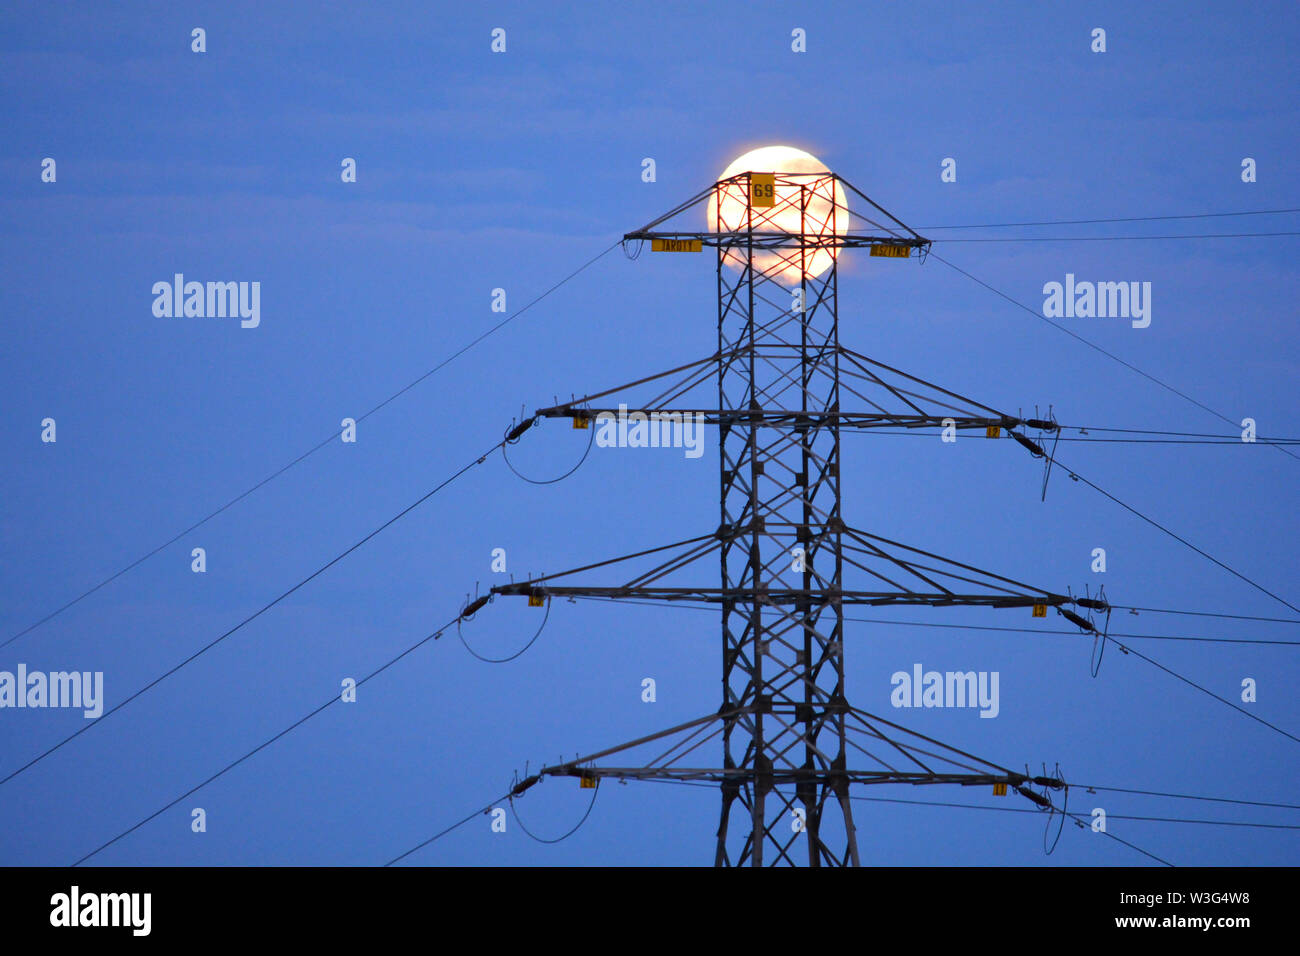 Power line pylon with a full moon in the background Stock Photo